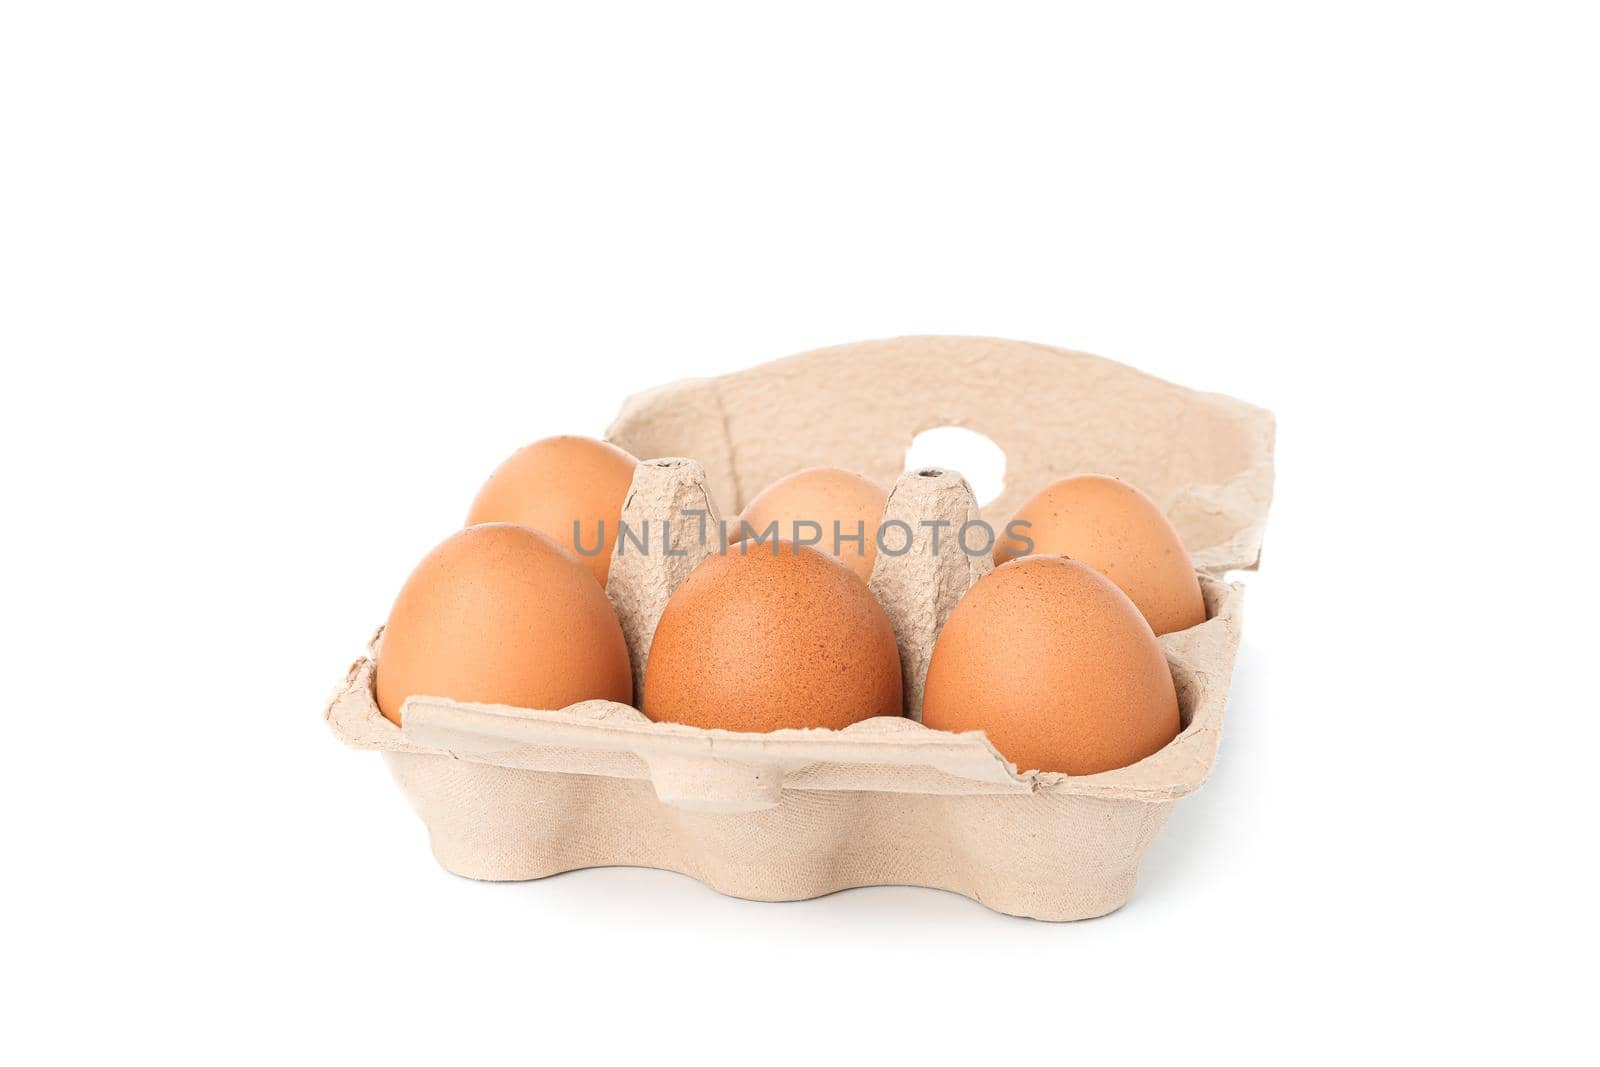 Brown chicken eggs in carton box isolated on white background by AtlasCompany